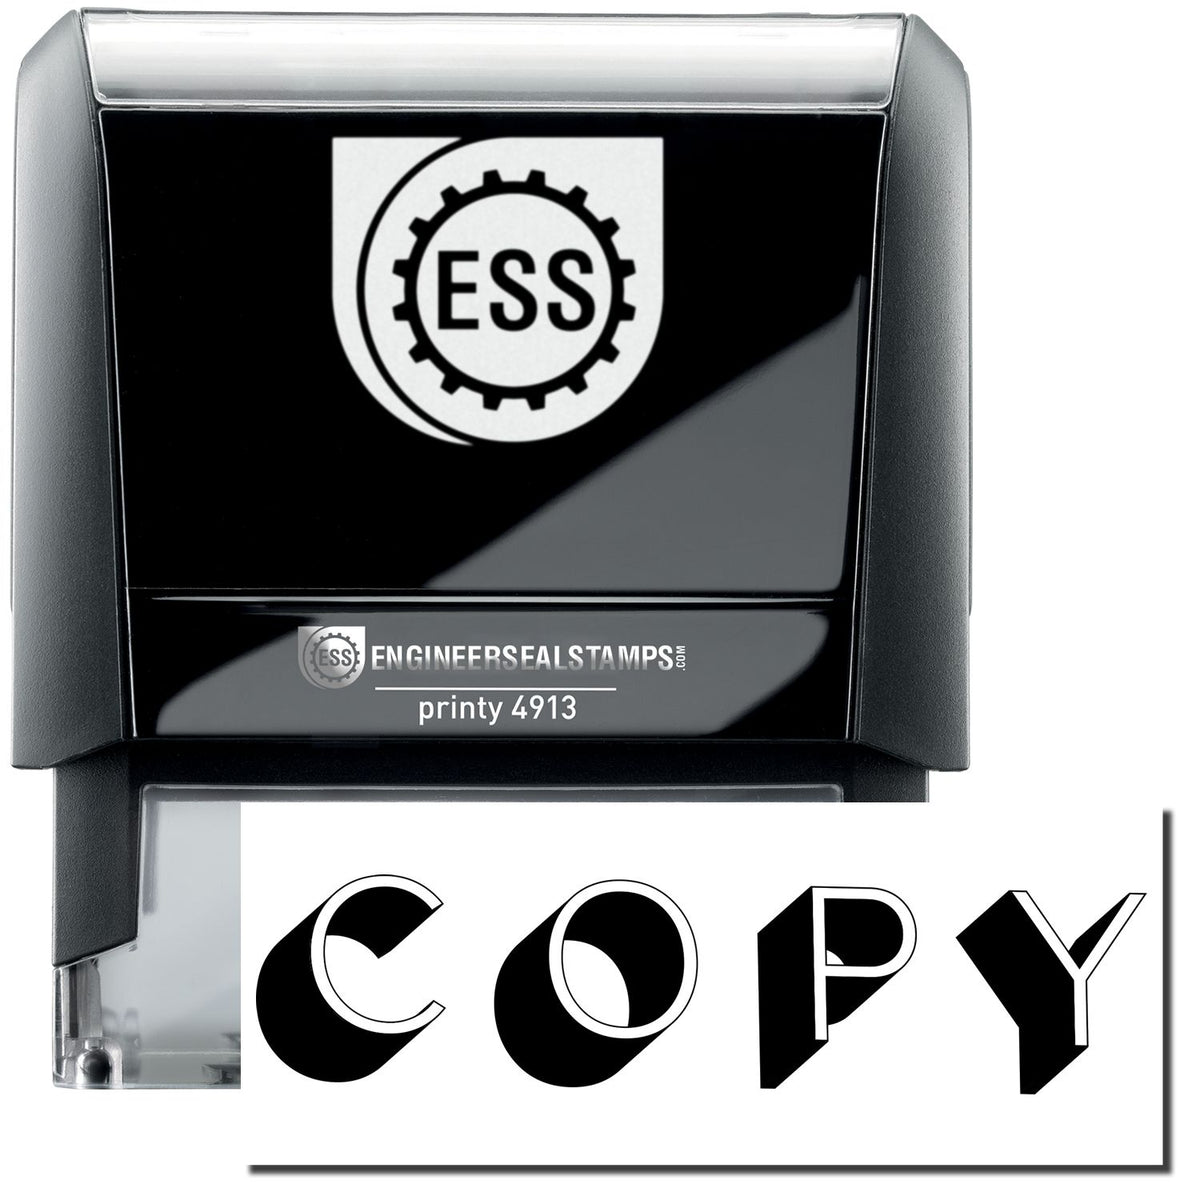 A self-inking stamp with a stamped image showing how the text &quot;COPY&quot; in a large outline font with a shadow behind it is displayed after stamping.